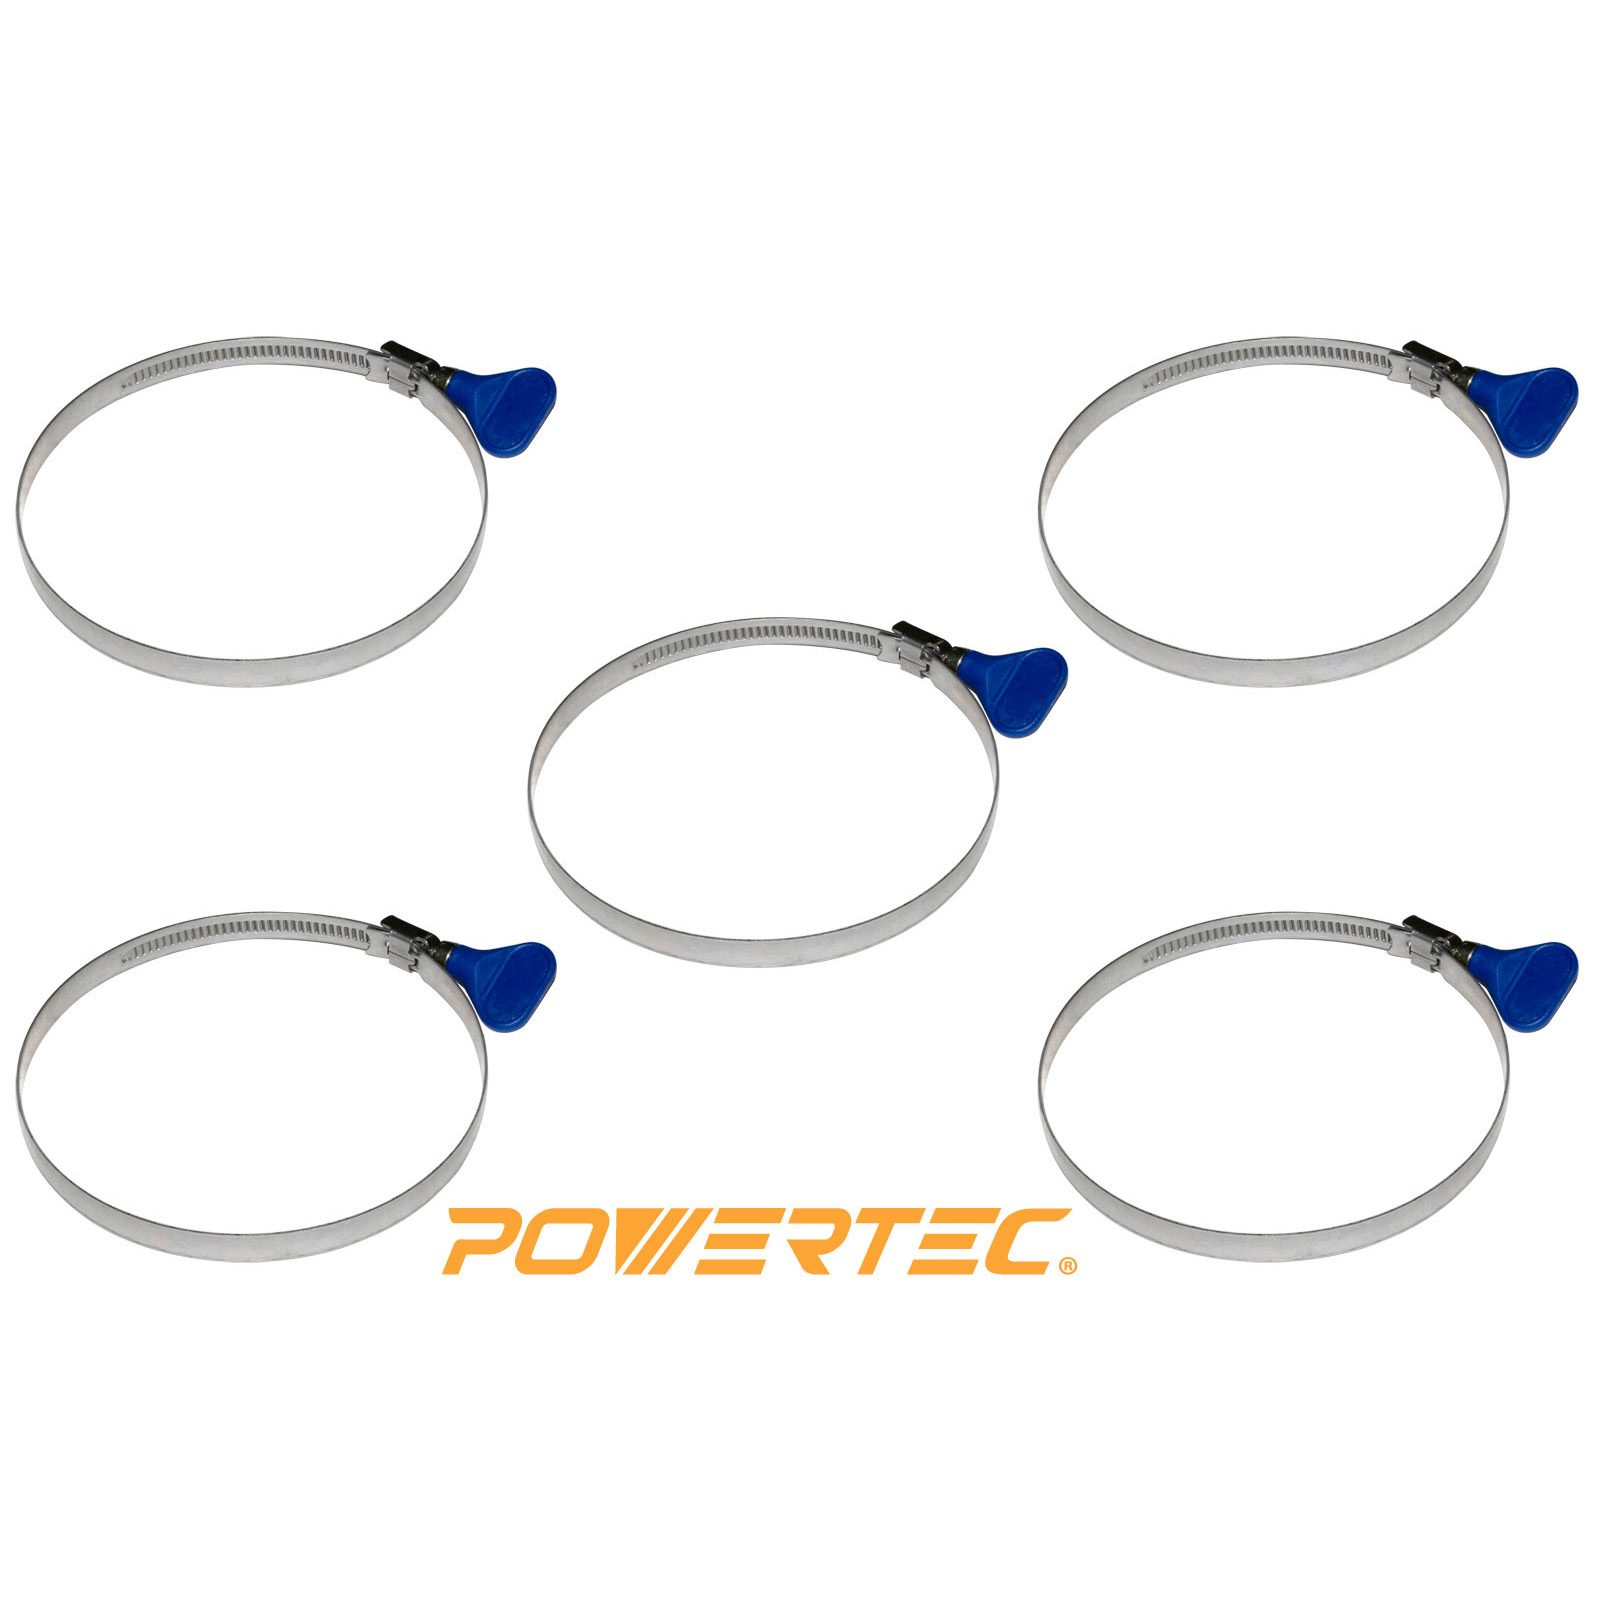 Powertec 70120 Key Hose Clamp, 3-1/2-Inch to 4-3/8-Inch, 5-PACK